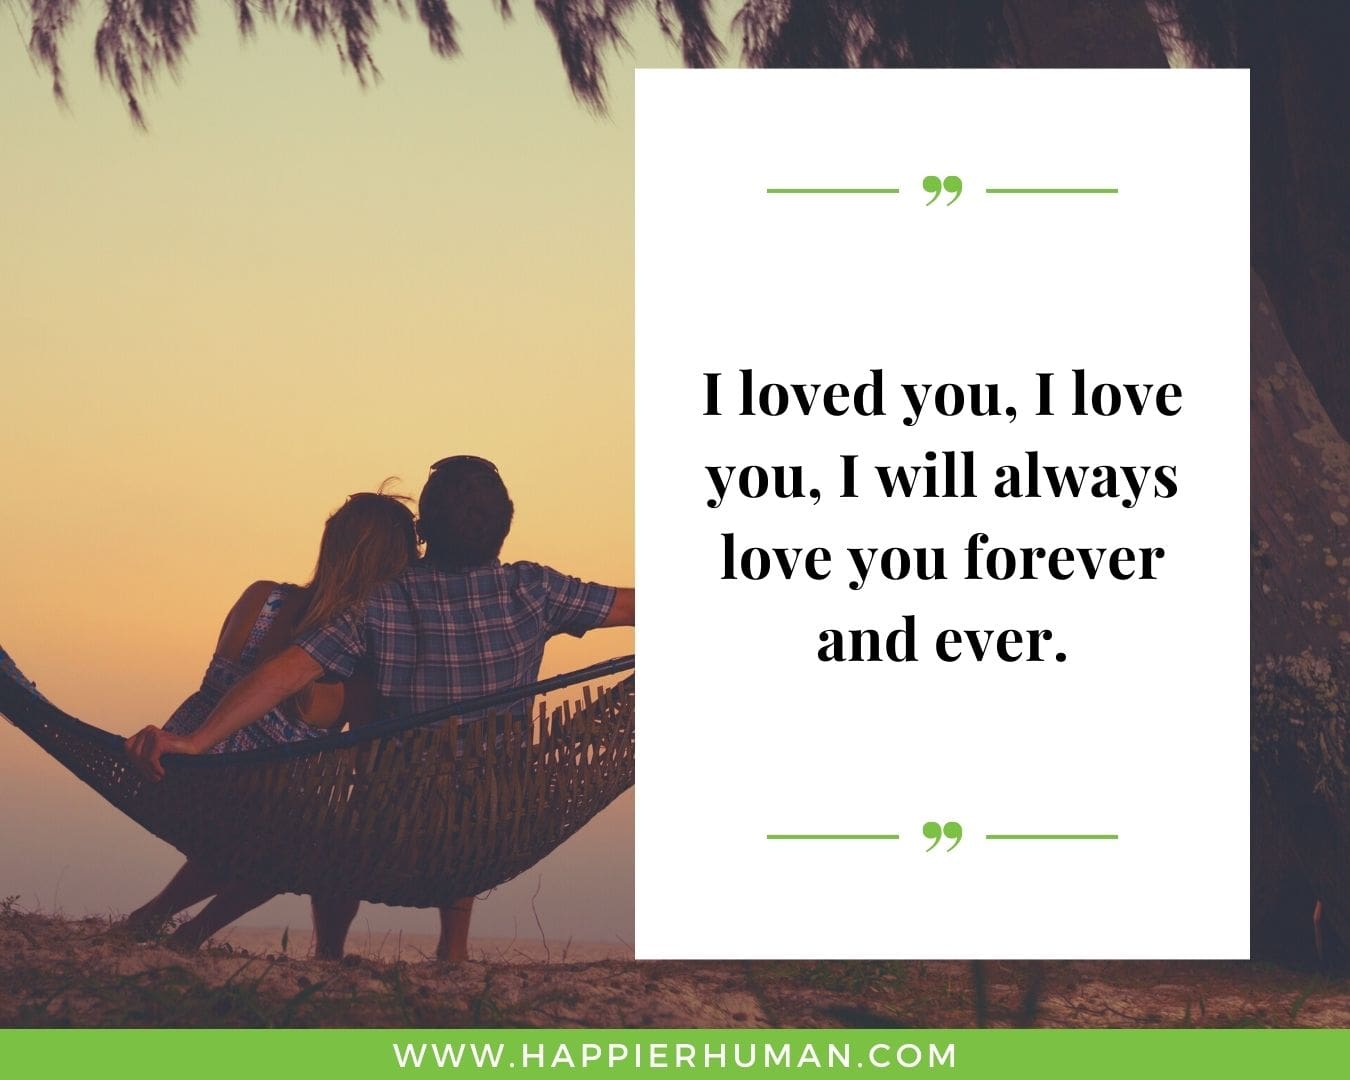 Unconditional Love Quotes for Her - “I loved you, I love you, I will always love you forever and ever.”